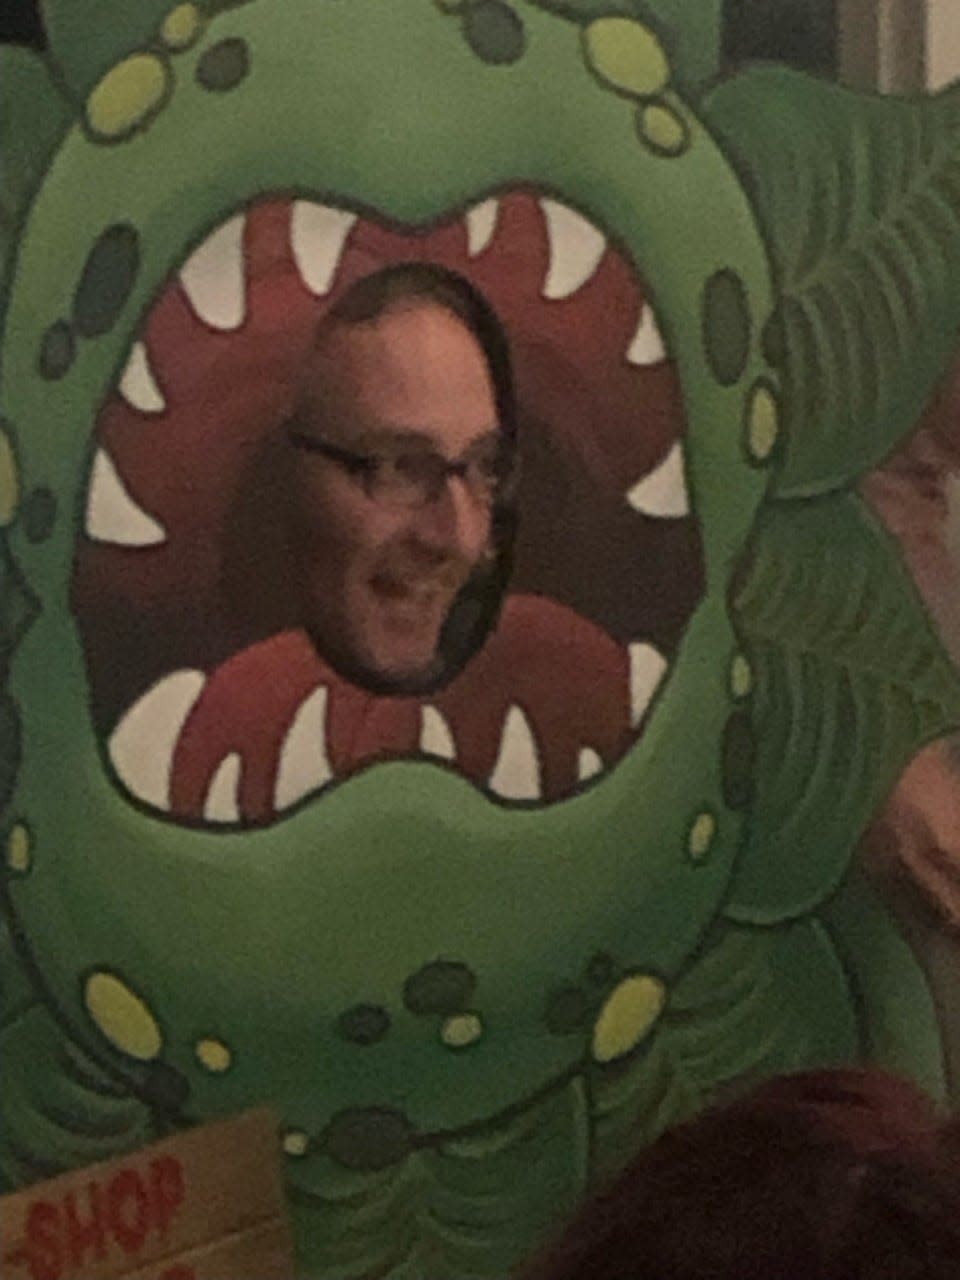 Lee Frank, director of development for the Prescott Park Arts Festival, poses in a prop that announces the festival will present "Little Shop of Horrors" at a reveal party Thursday.